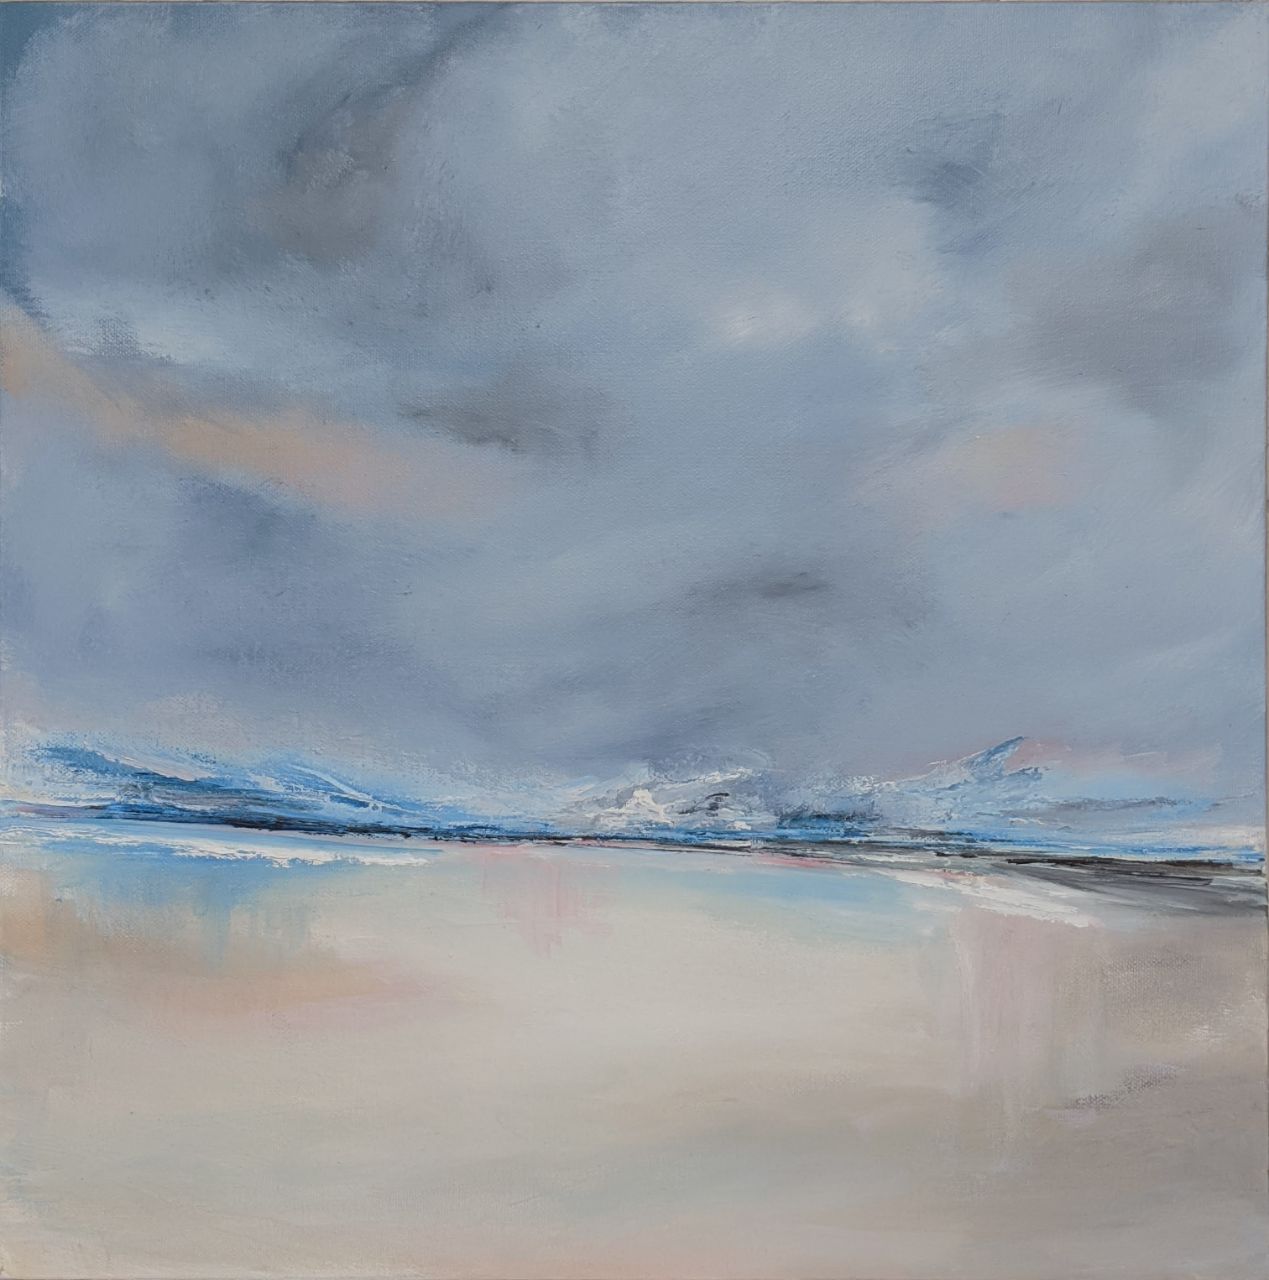 Disturbed Abstract Seascape oil painting by Jo Earl | Grey skies over reflective beach foreground with broken waves in the horizon